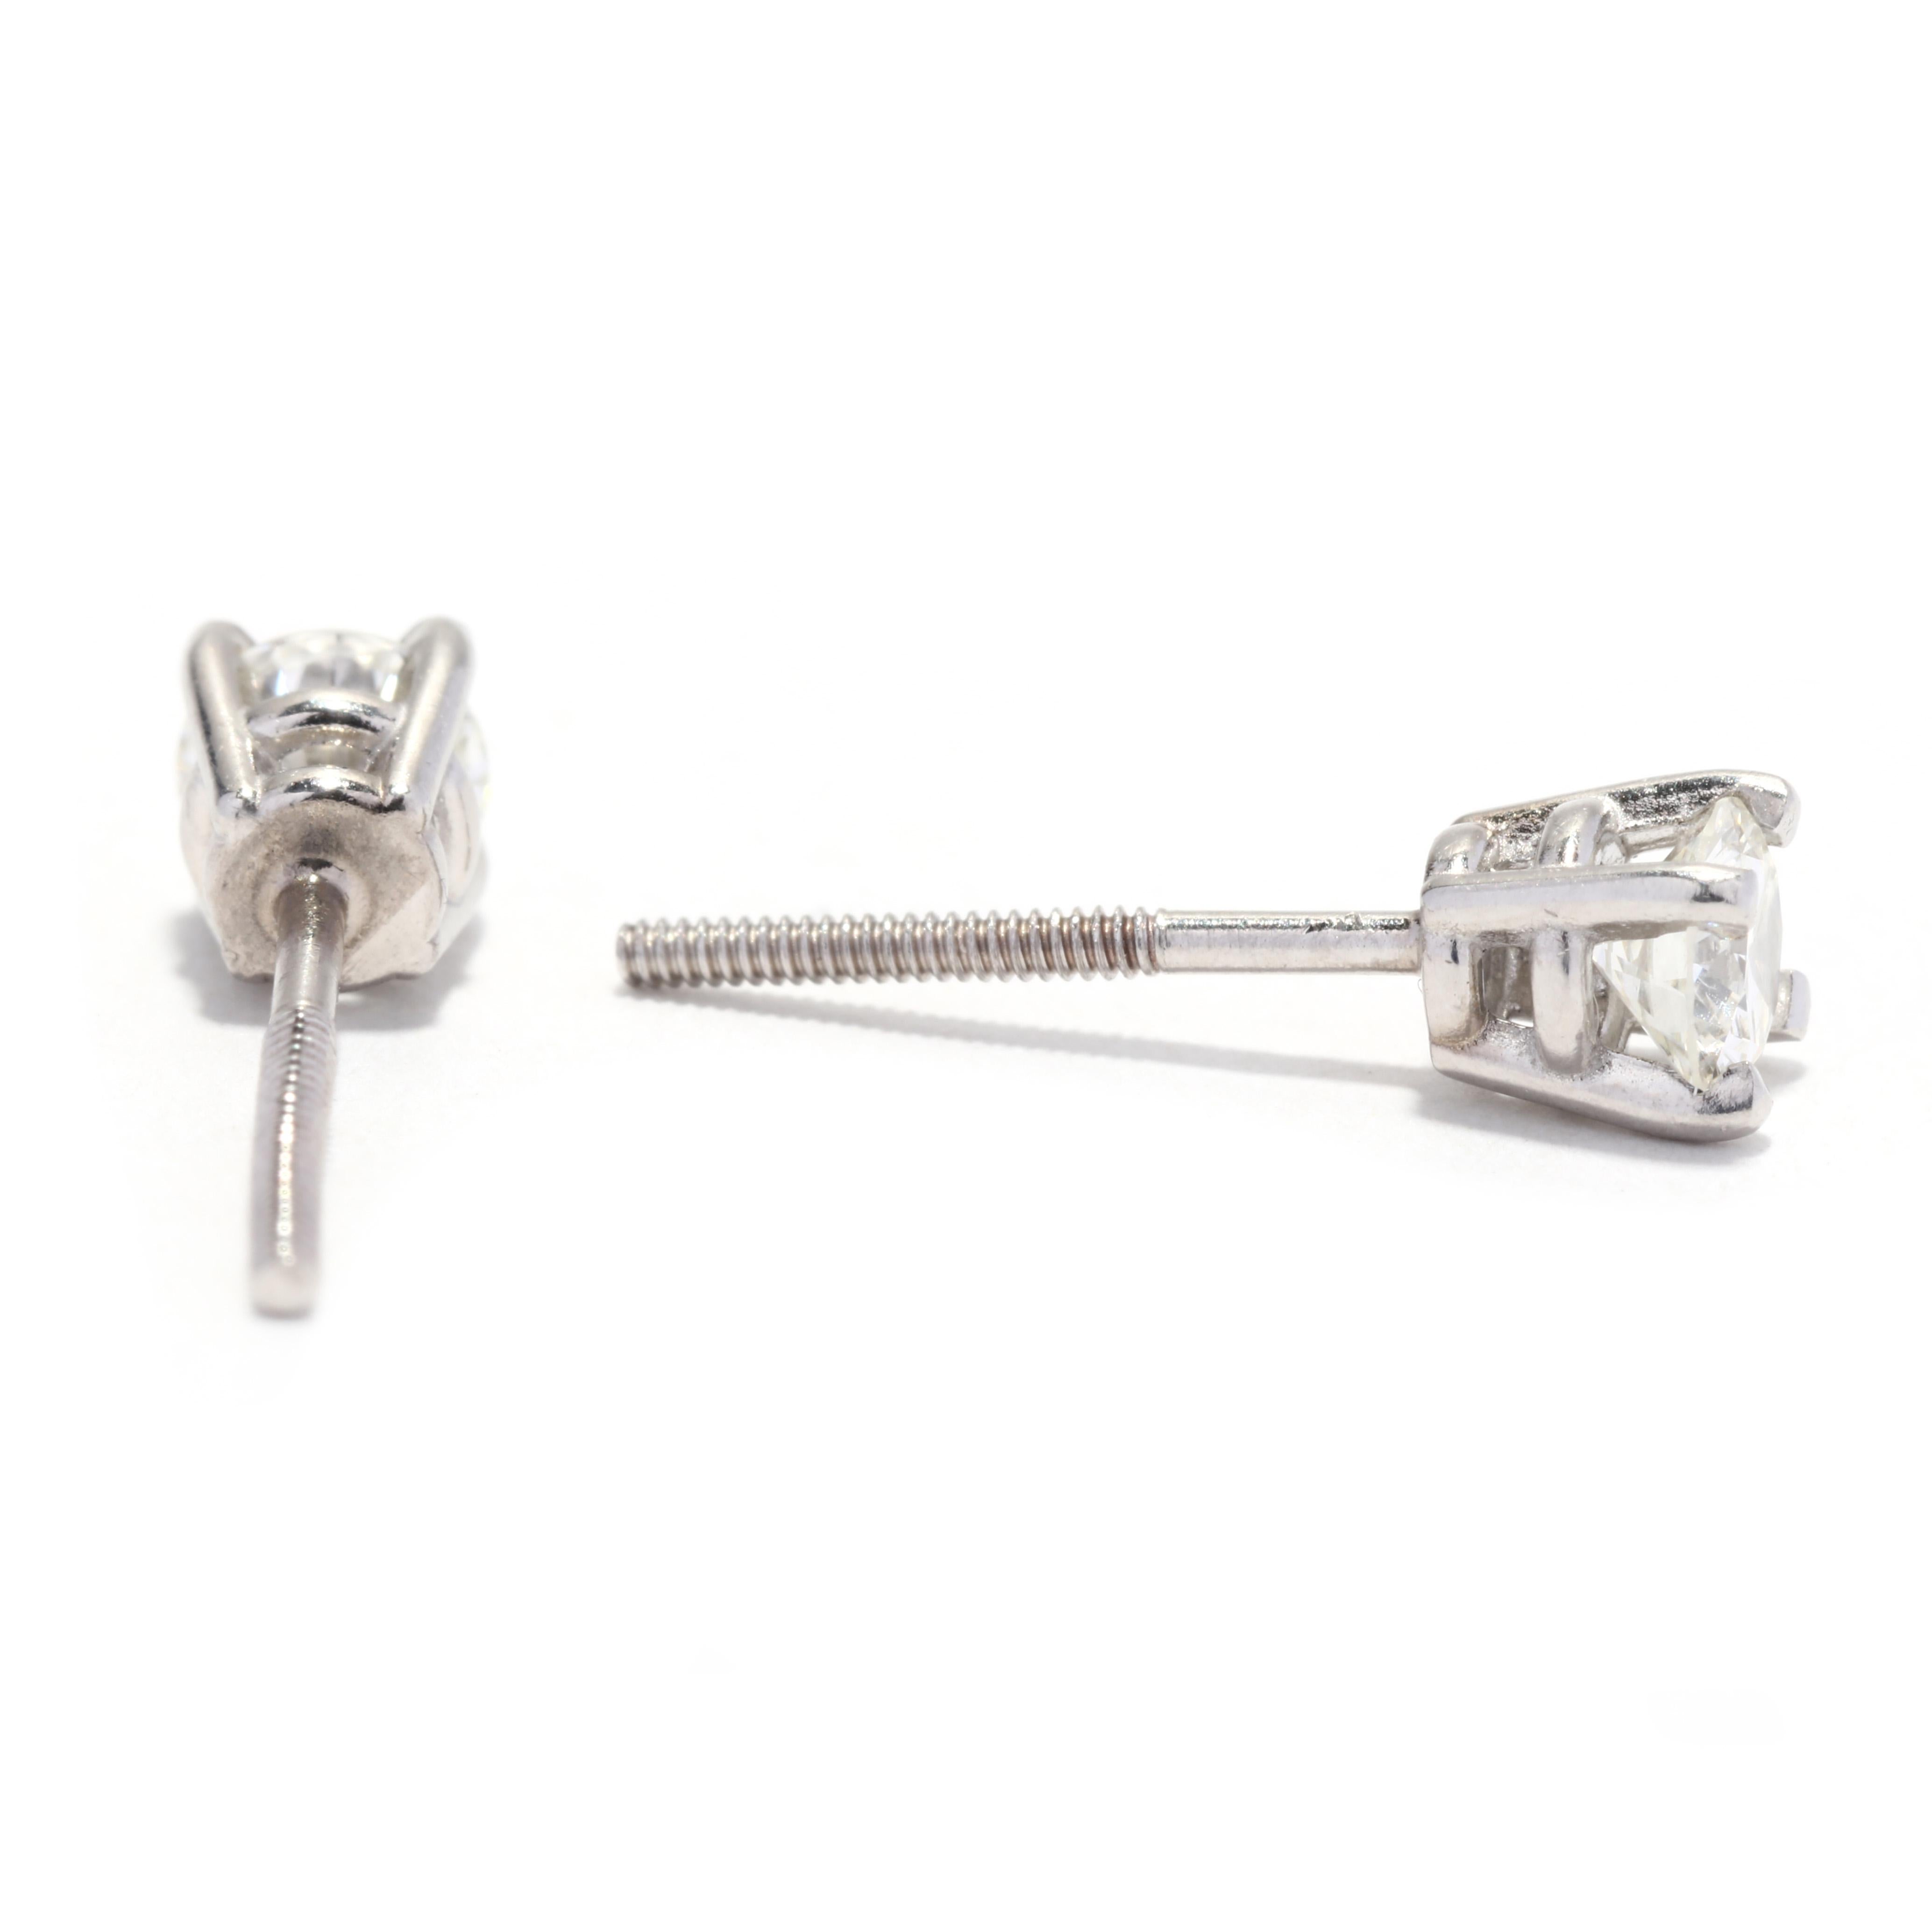 A pair of vintage platinum diamond solitaire screw on earrings. This simple stud earrings feature prong set, round brilliant cut diamond center stone weighing approximately .50 total carats and with pierced screw back closures.

Stones: 
- diamonds,